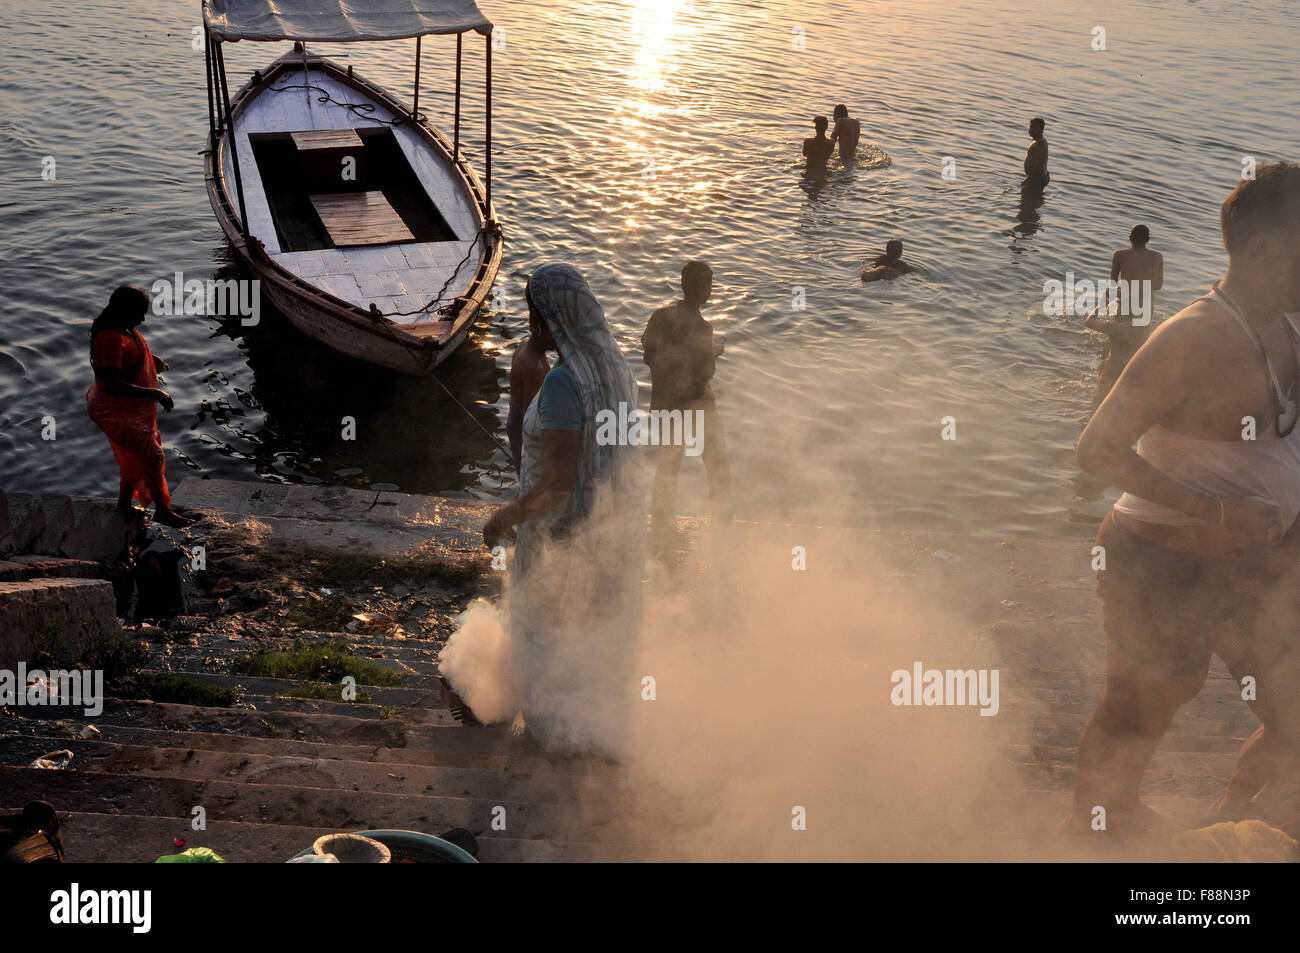 Devotees taking bath and a women burning some waste material at the bank of Holy River Ganges in Varanasi, Uttar Pradesh, India. Stock Photo